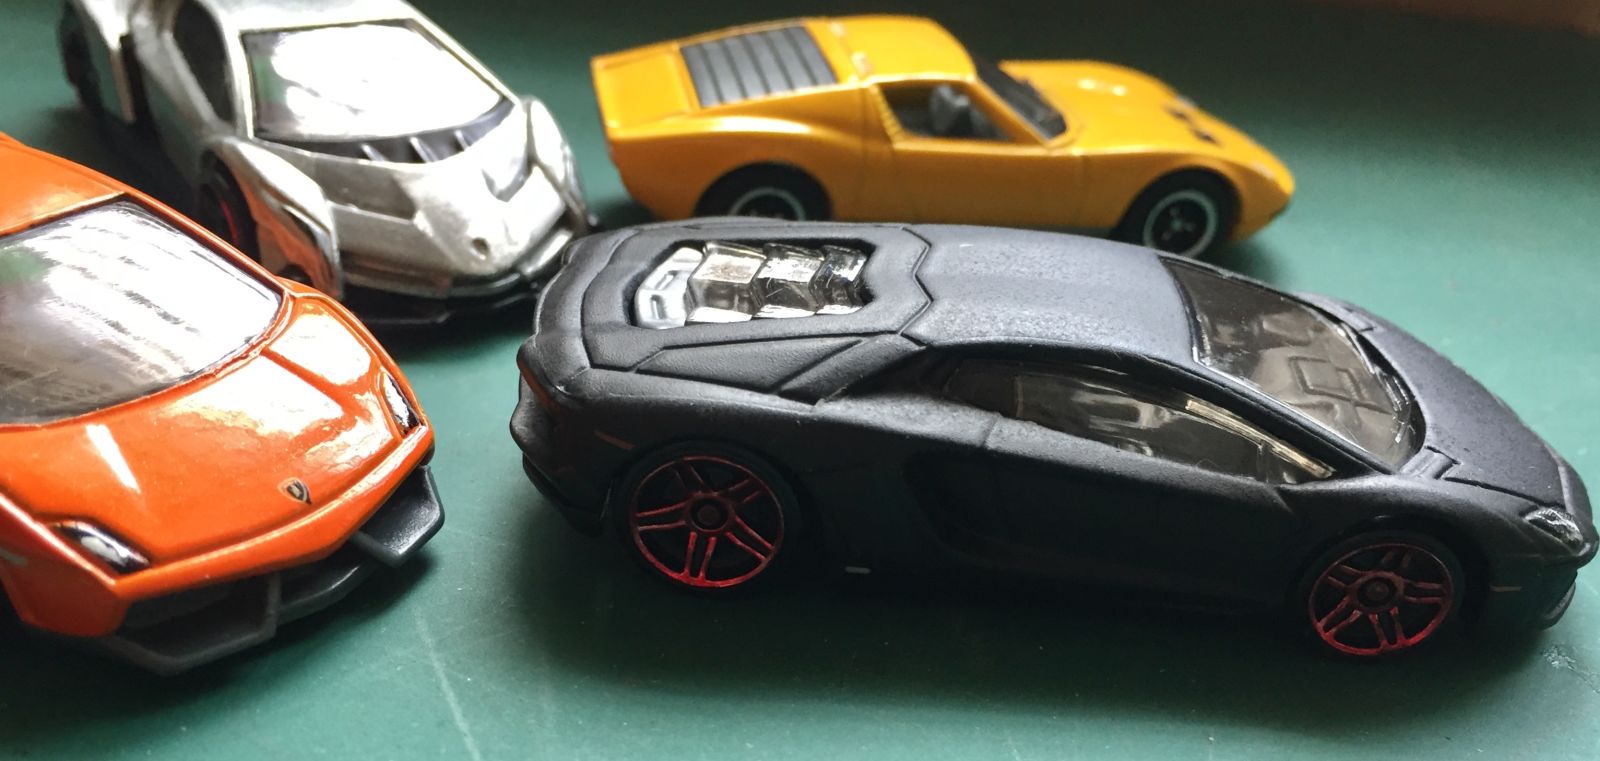 You guys must be wondering why this matte black Aventador has got red rims on... I used a red Sharpie to colour them a few years ago :)